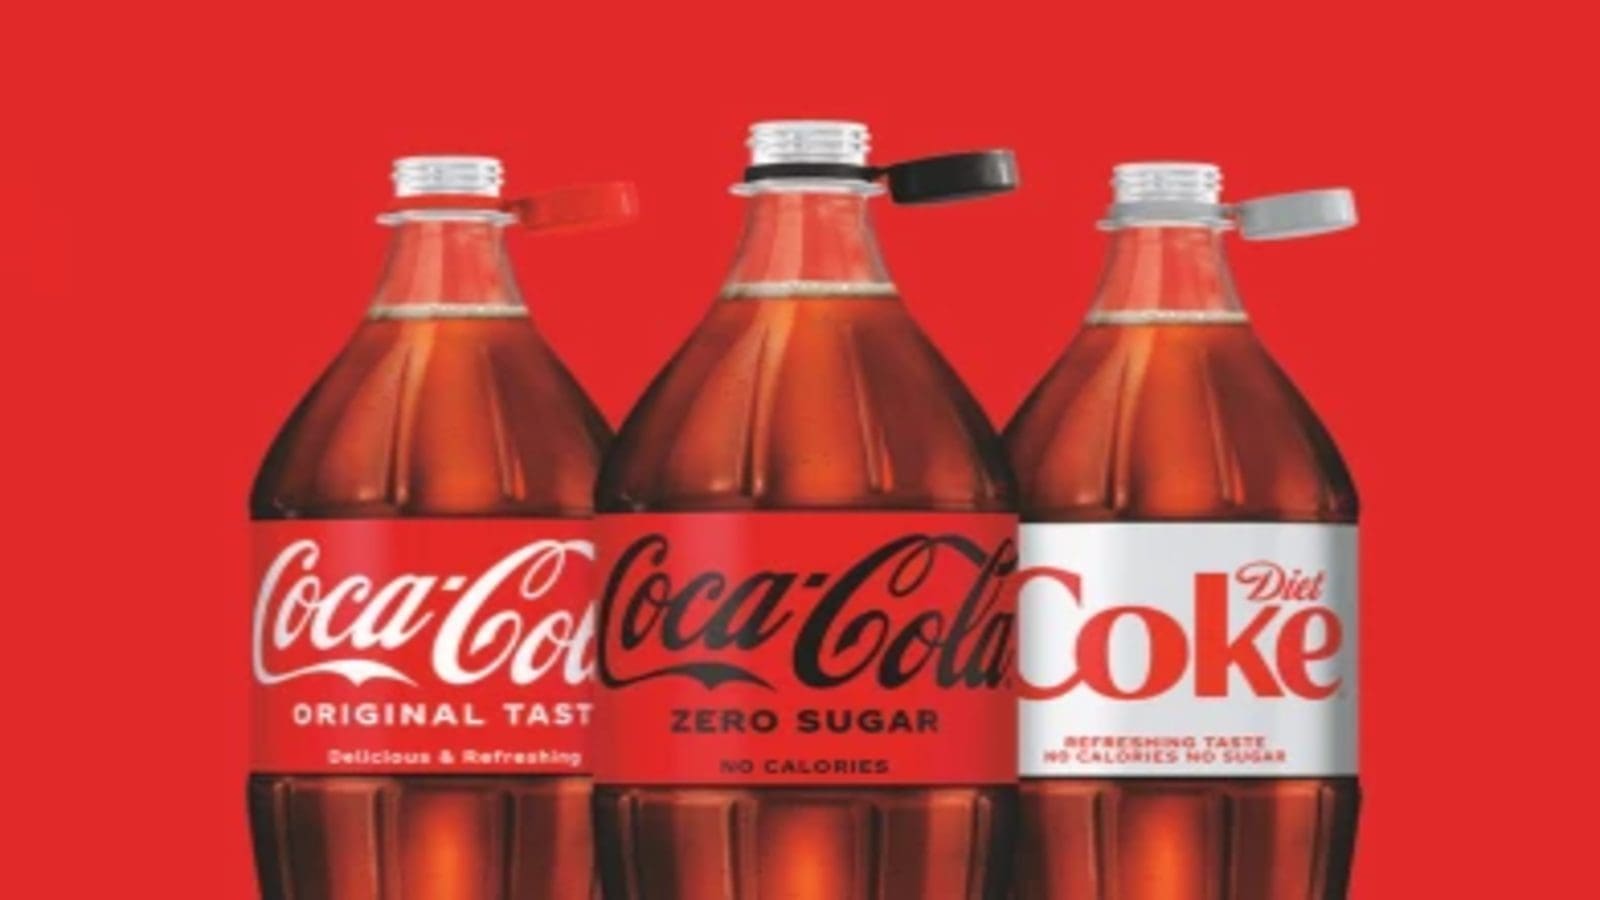 Coca-Cola develops new bottles with attached caps to foster sustainability